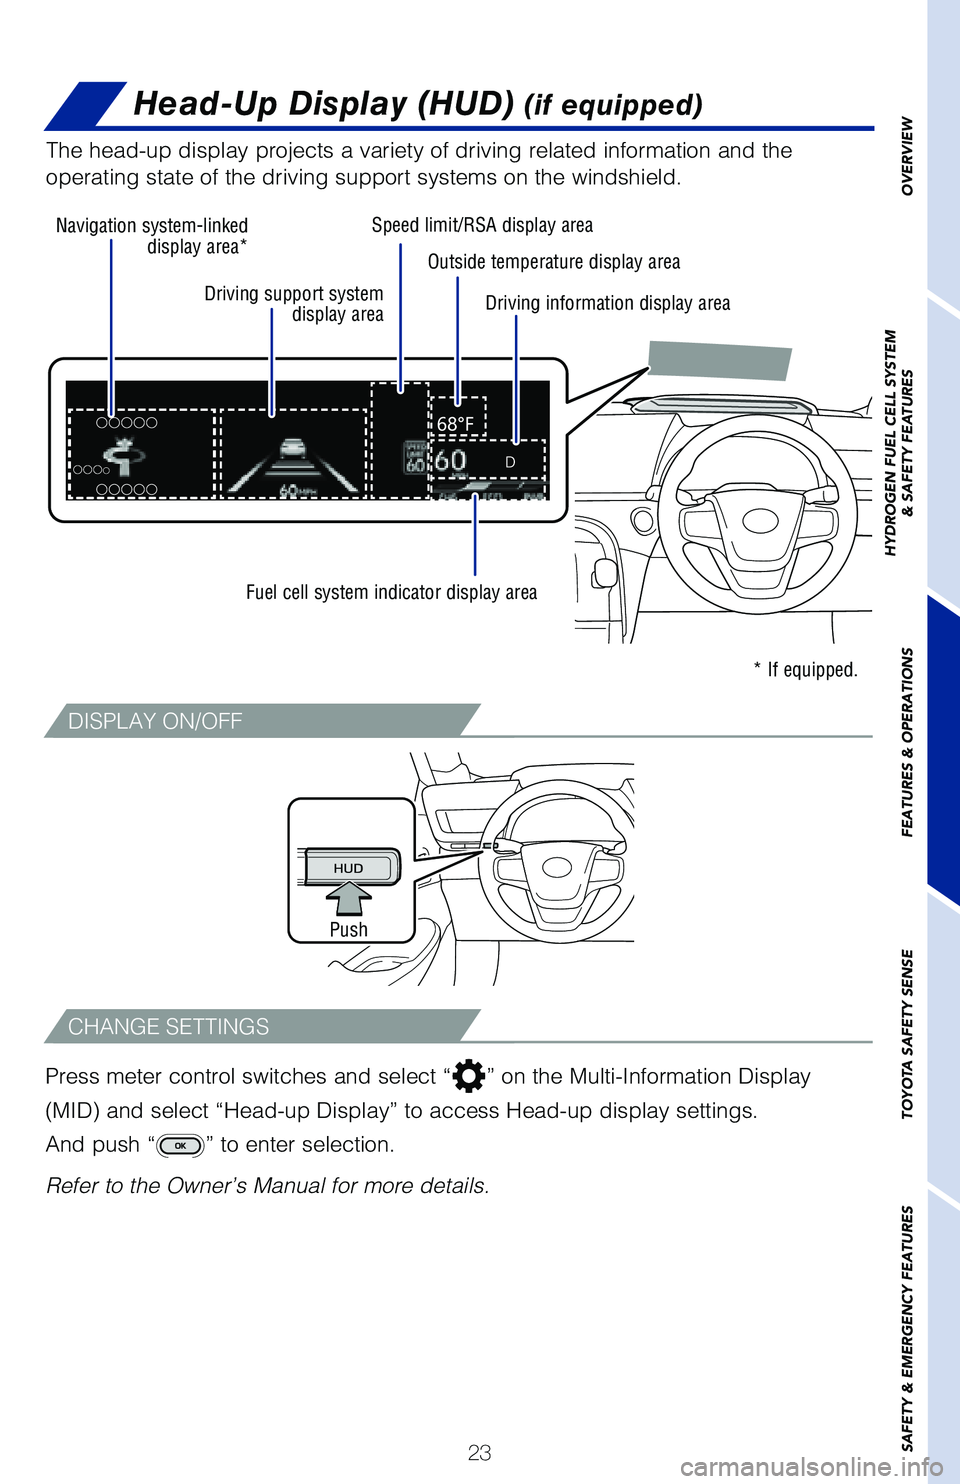 TOYOTA MIRAI 2021   (in English) User Guide 23
Head-Up Display (HUD) (if equipped)
Navigation system-linked display area*
Driving support system  display areaSpeed limit/RSA display area
Fuel cell system indicator display area * If equipped.
Dr